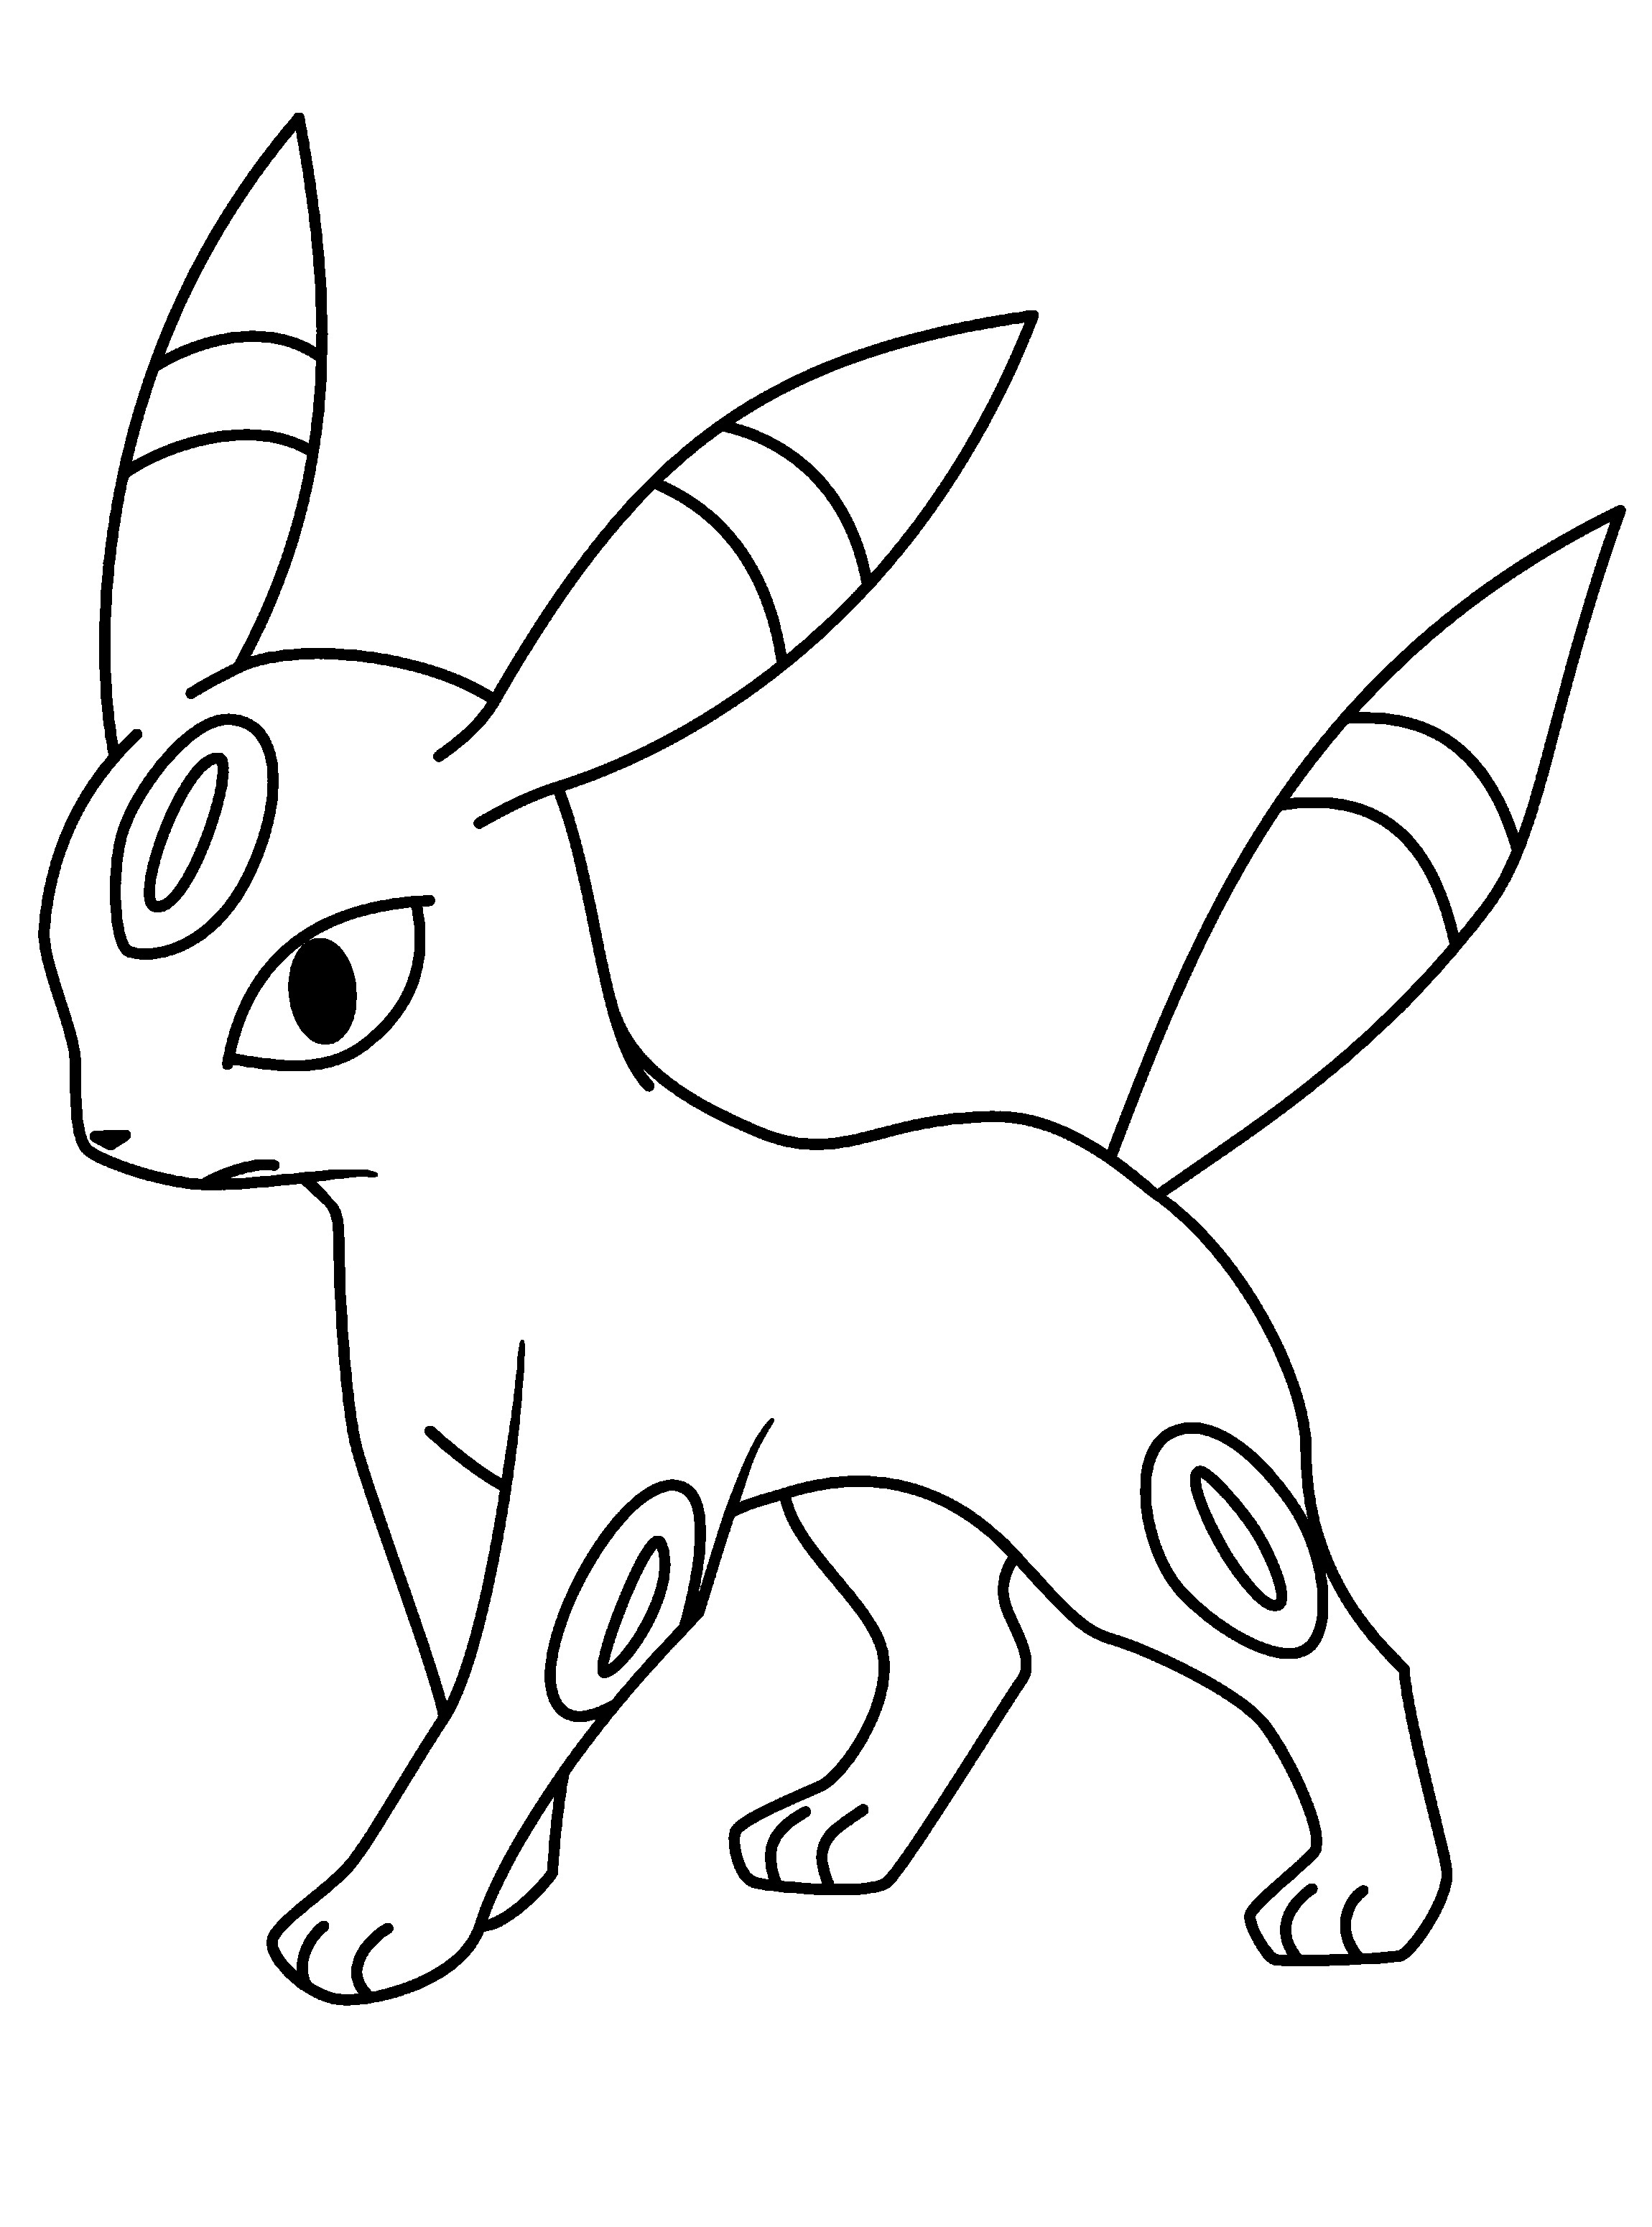 Pokemon Printable Coloring Pages
 Pokemon Coloring Pages Join your favorite Pokemon on an